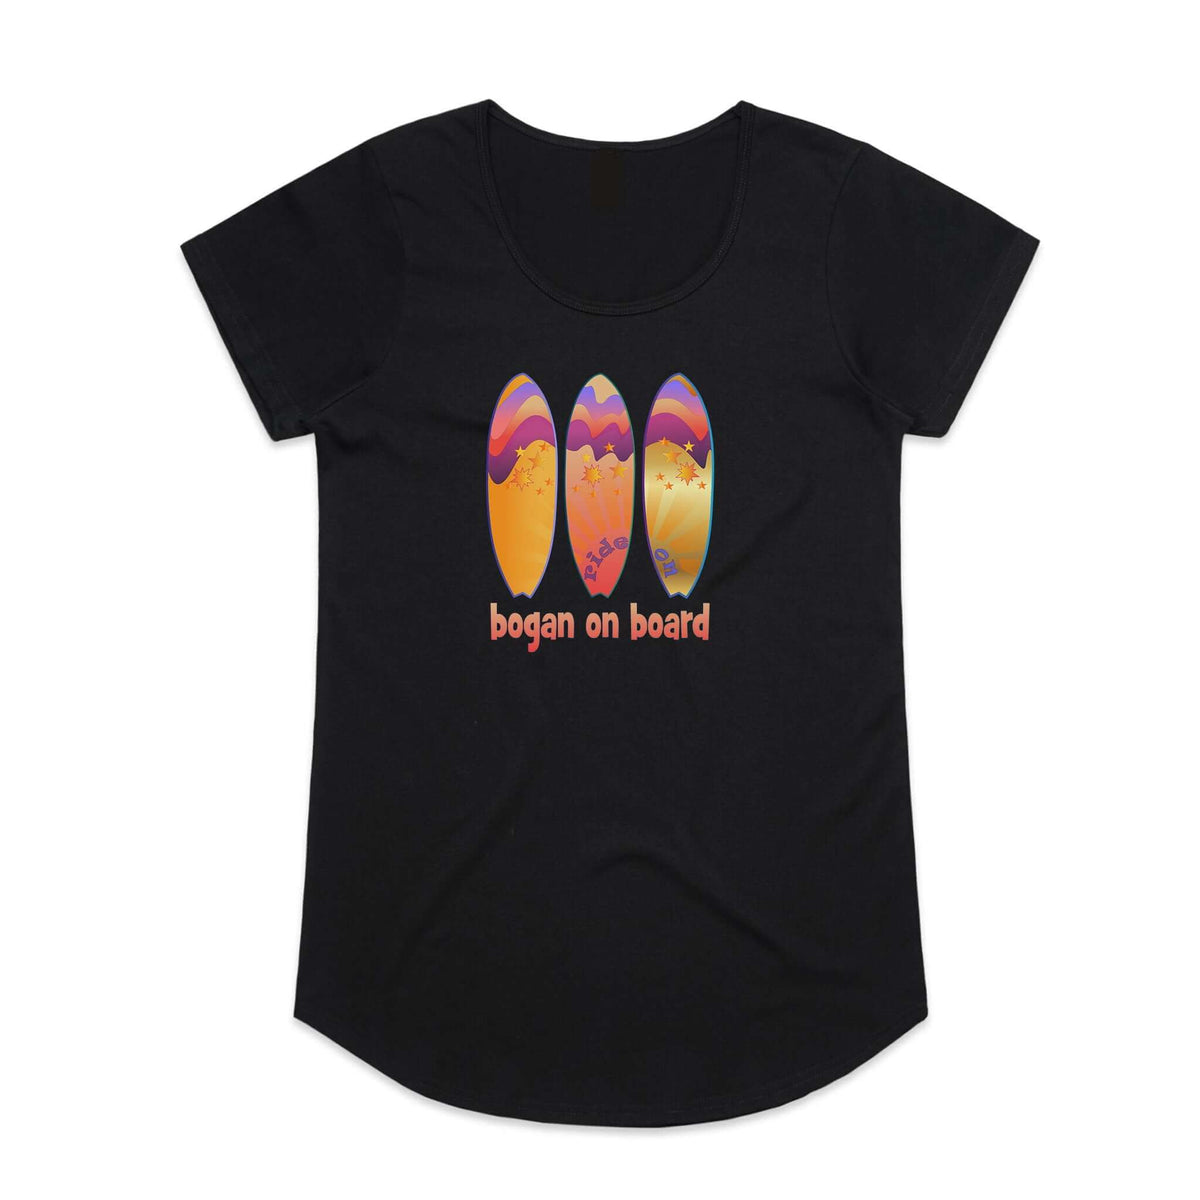 Women's black t shirt with Bogan on Board design featuring three brightly coloured surfboards.